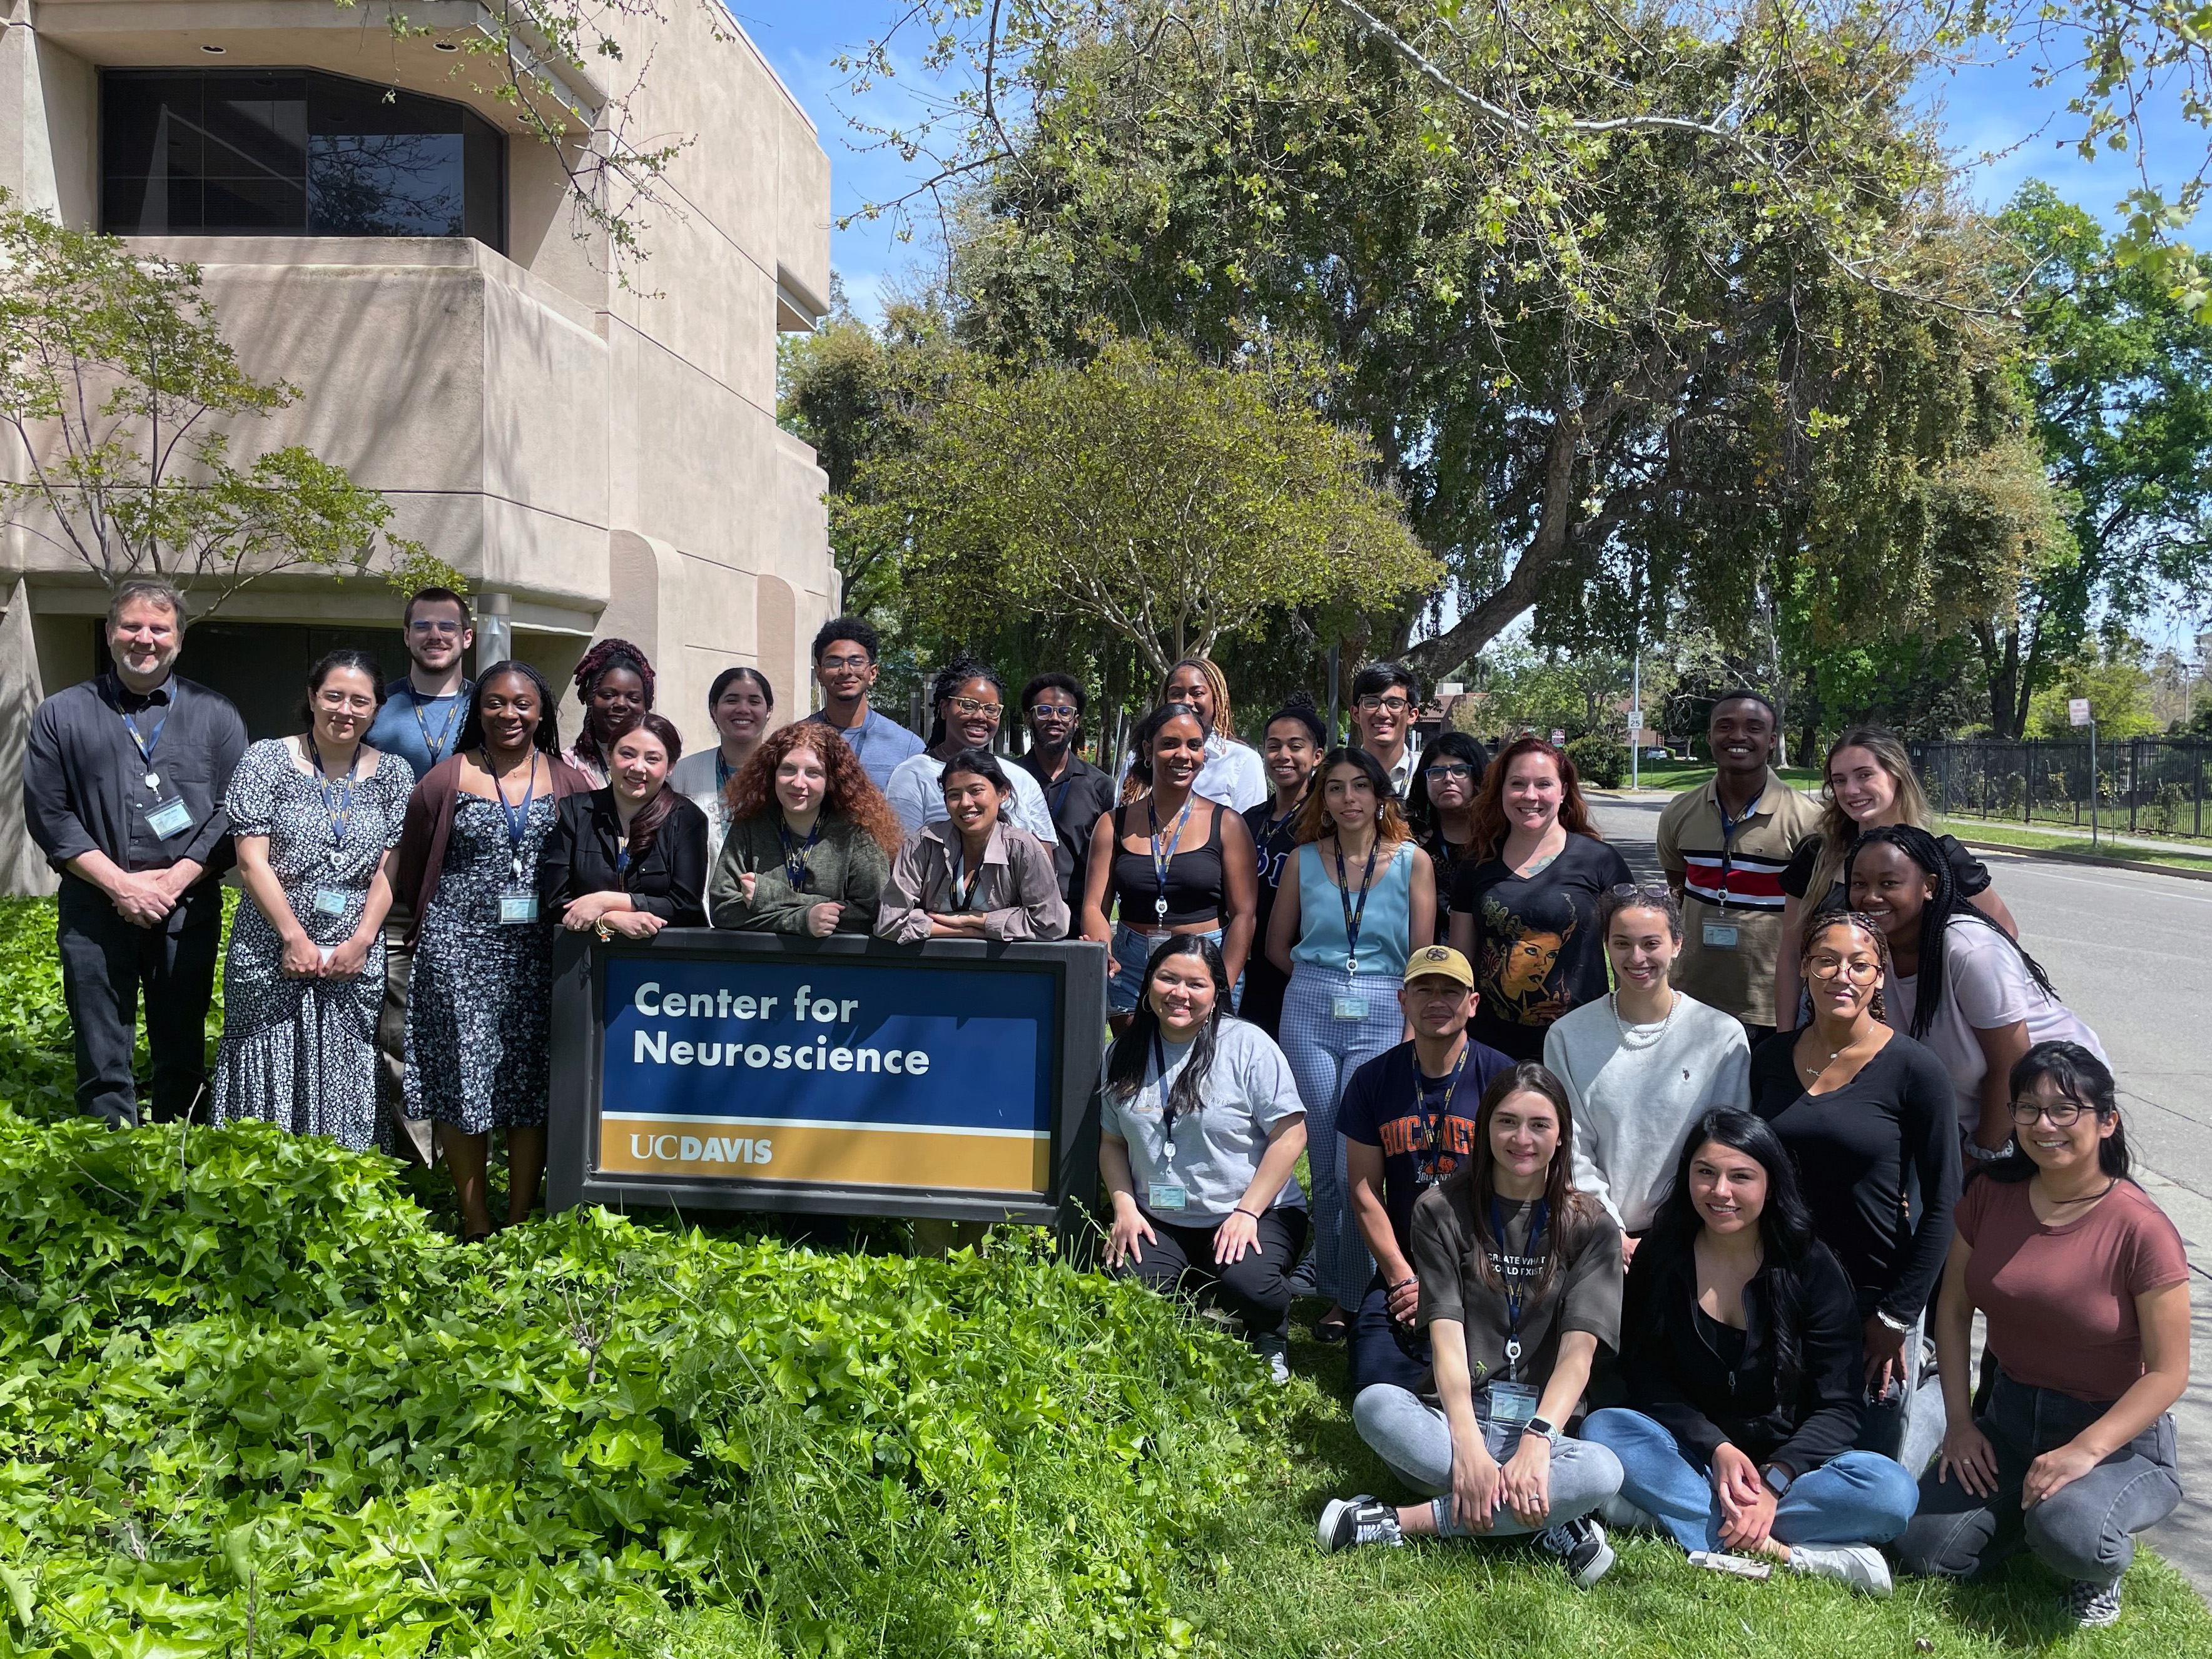 30 people posing for a group photo outside in front of the UC Davis Center for Neuroscience sign